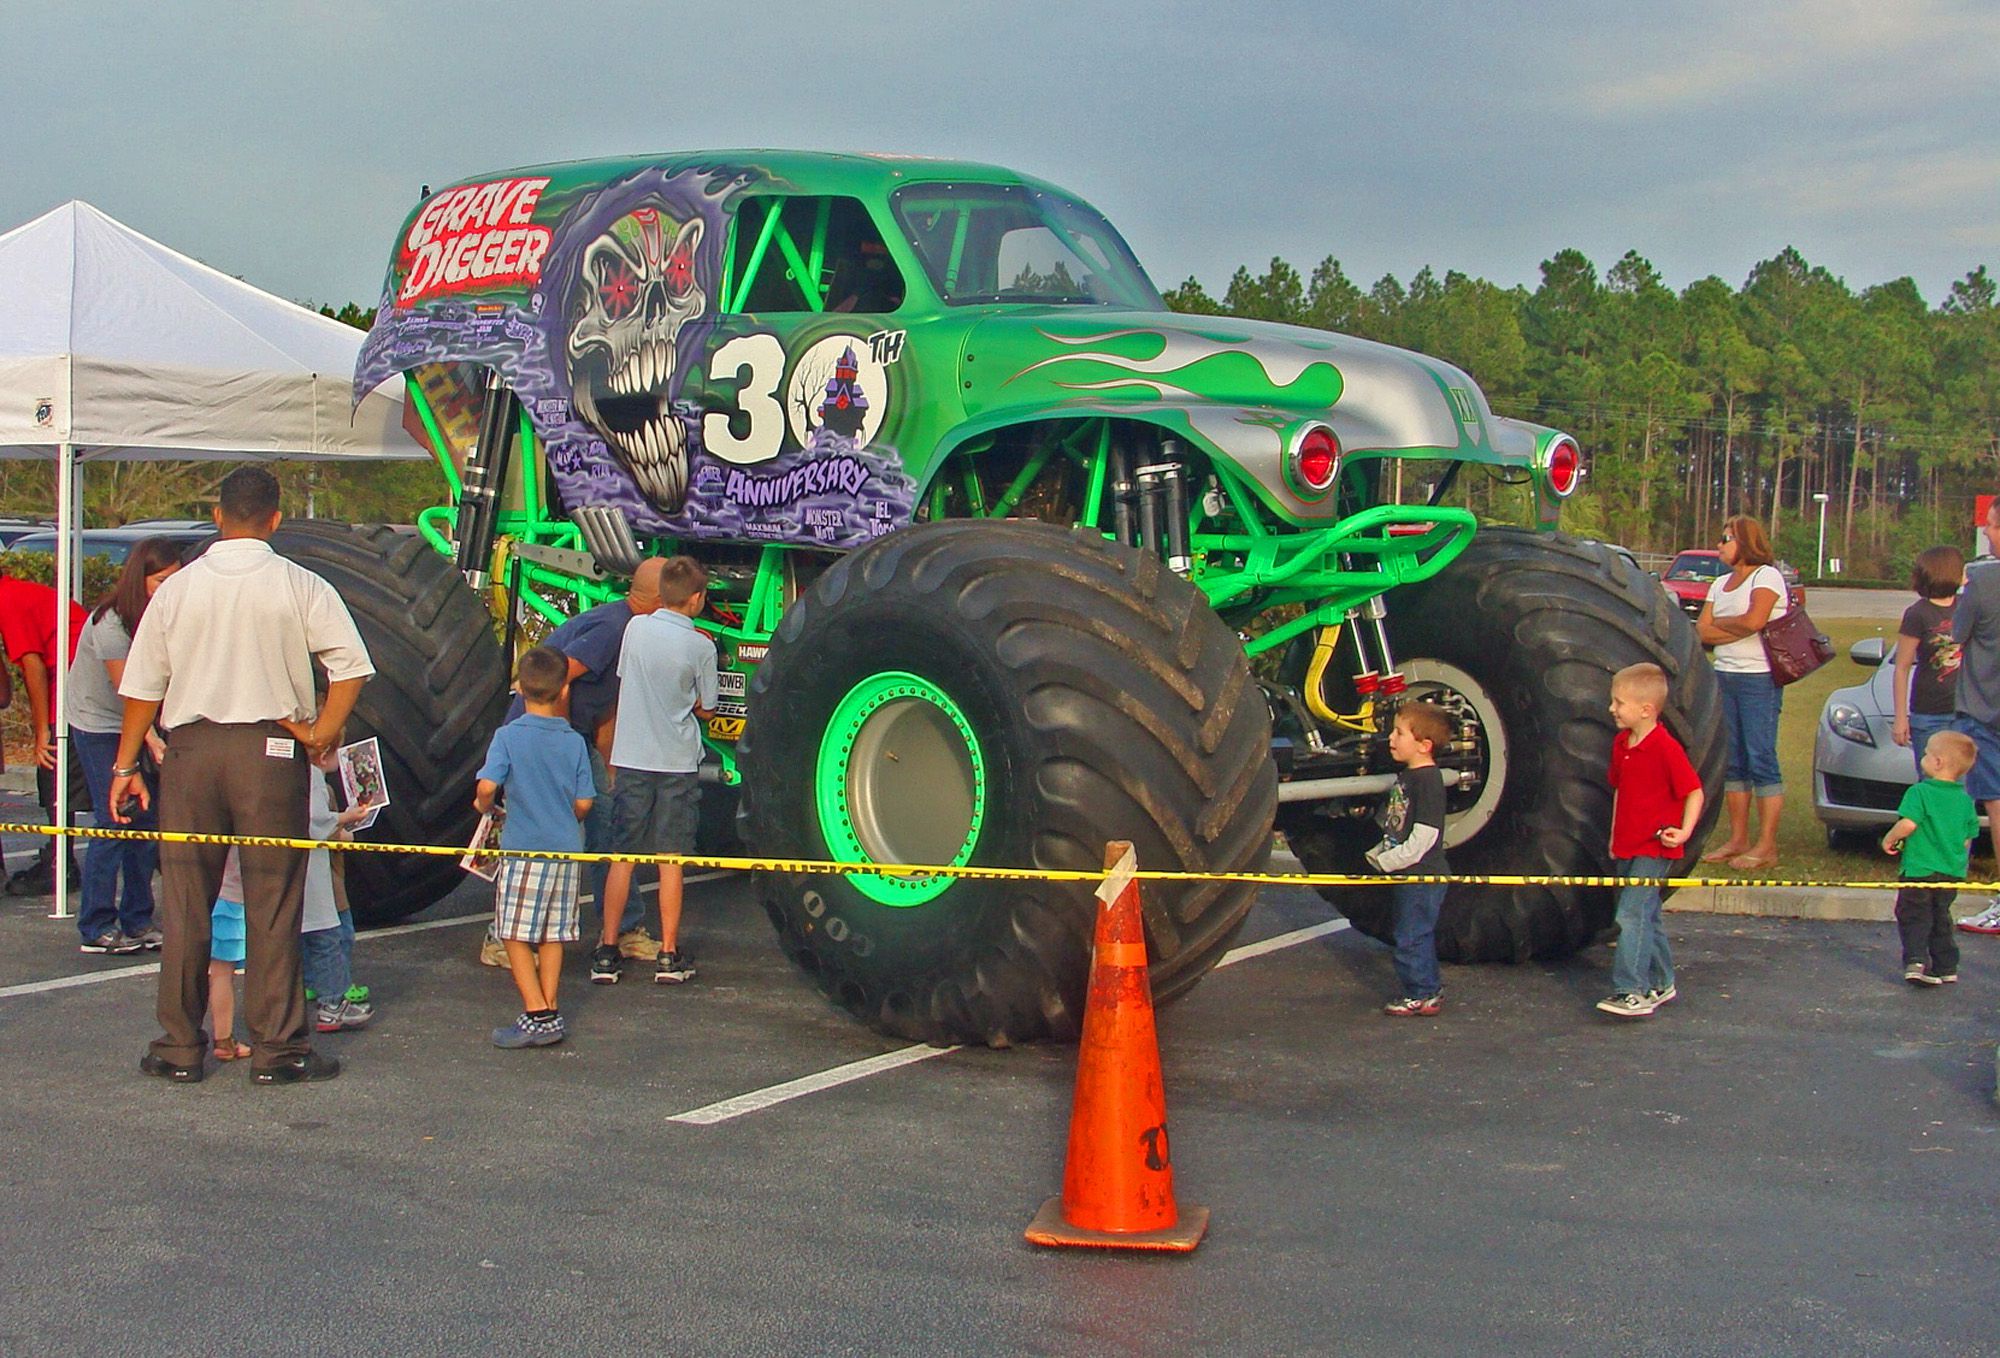 Monster Jam® Returns to Mercedes-Benz Stadium for an Action-Packed